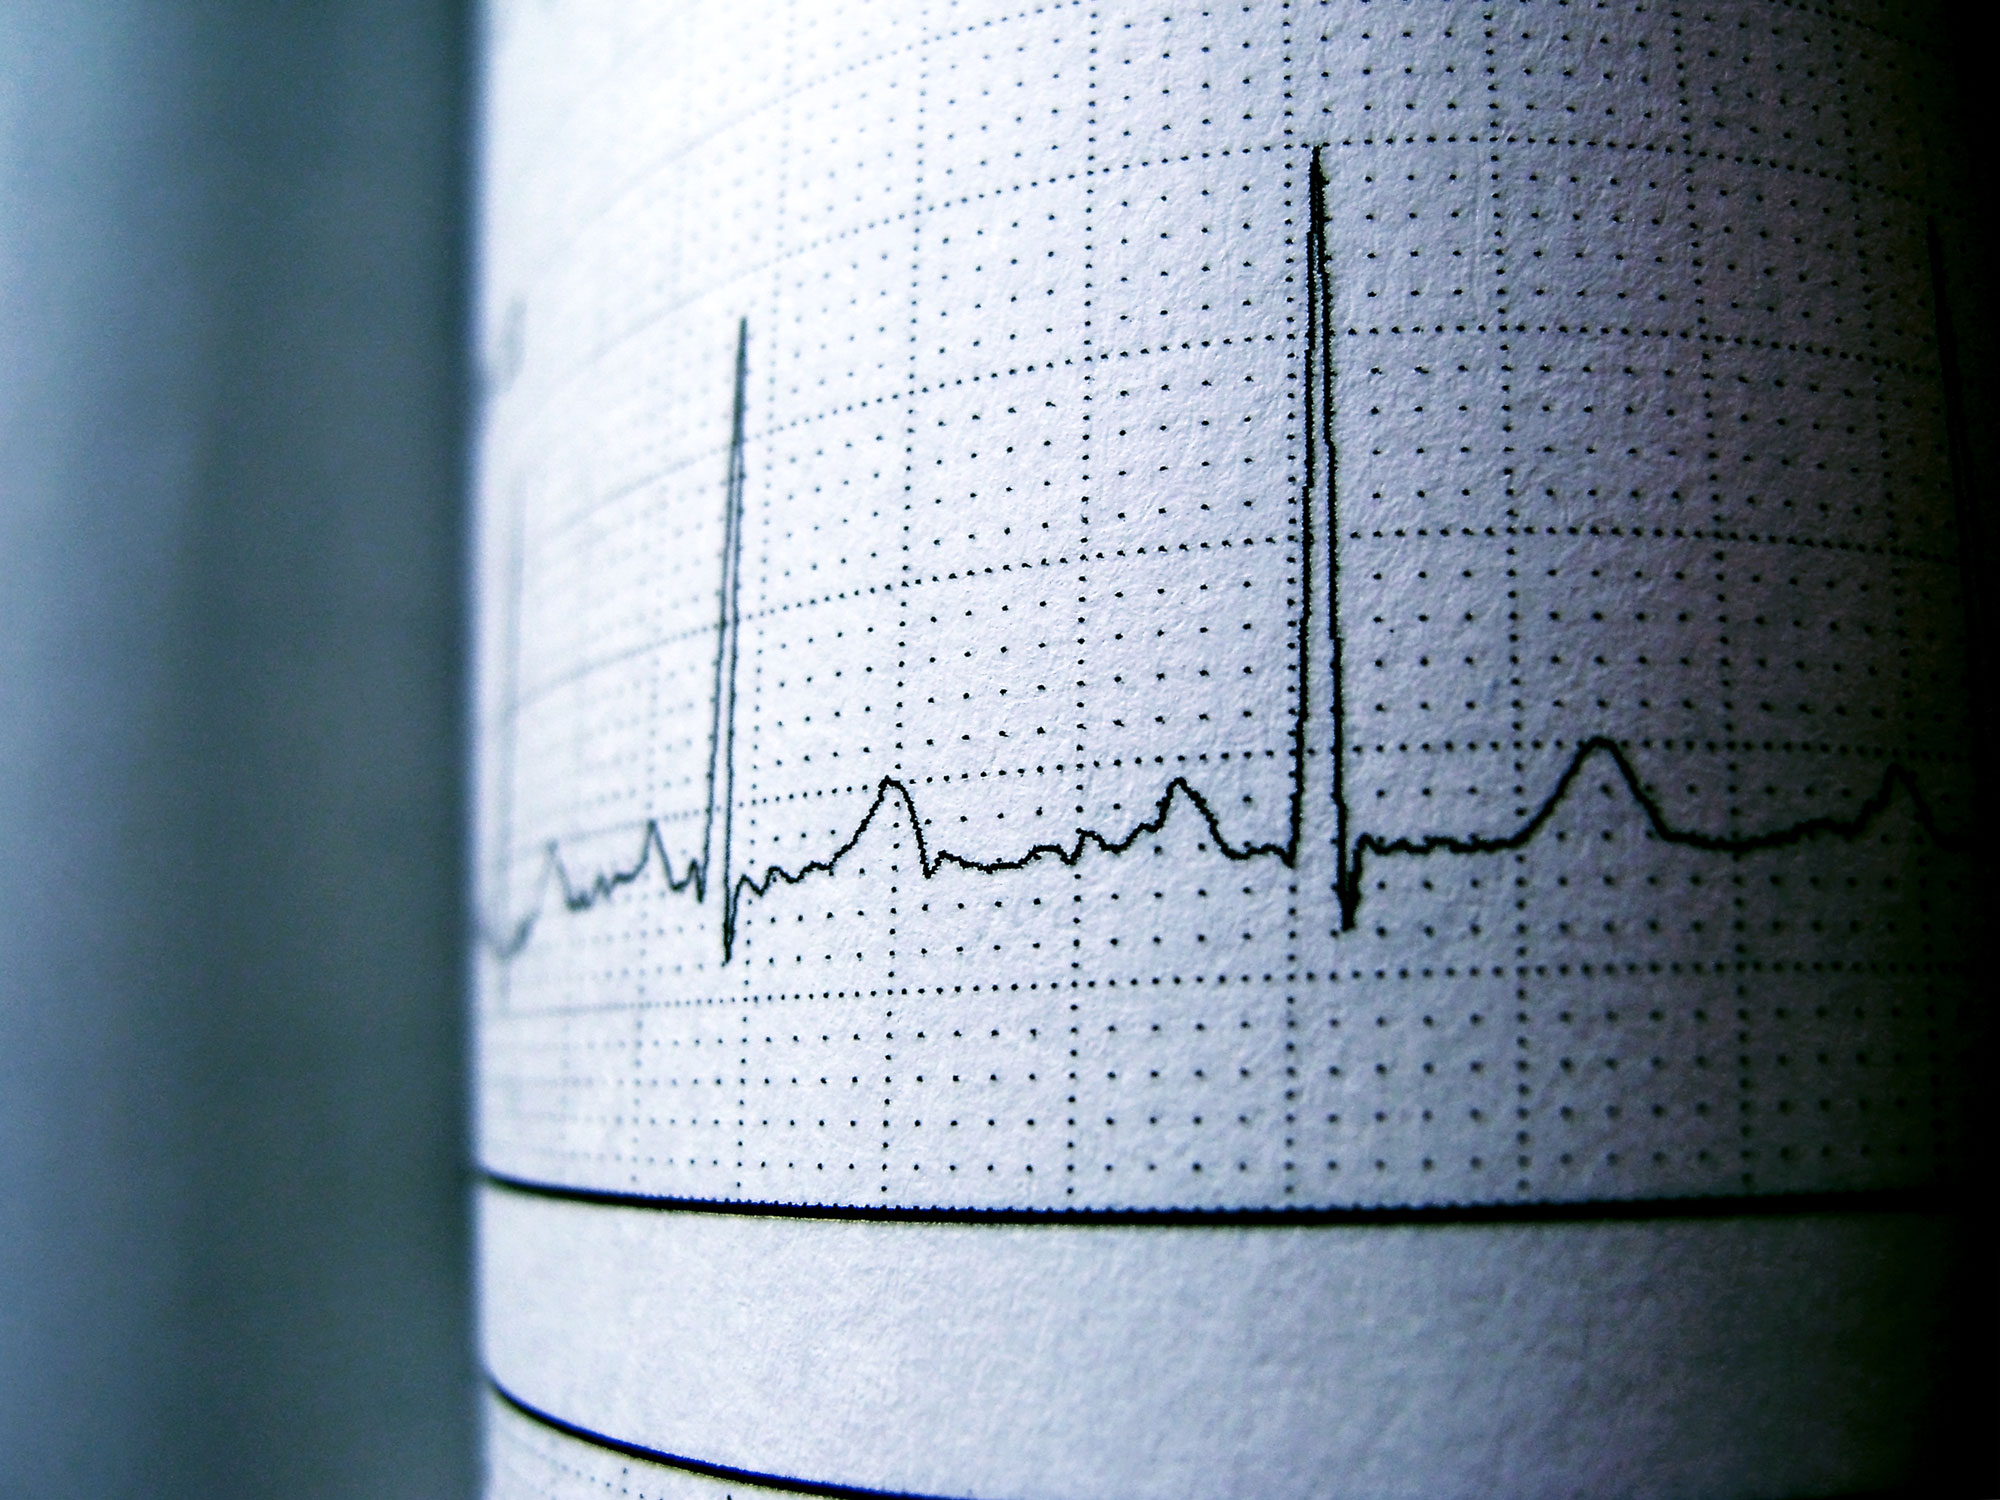 IN THE NEWS: CENTRALIZED CARDIAC TELEMETRY MONITORING SLASHES ALARM FATIGUE, SAVES LIVES!